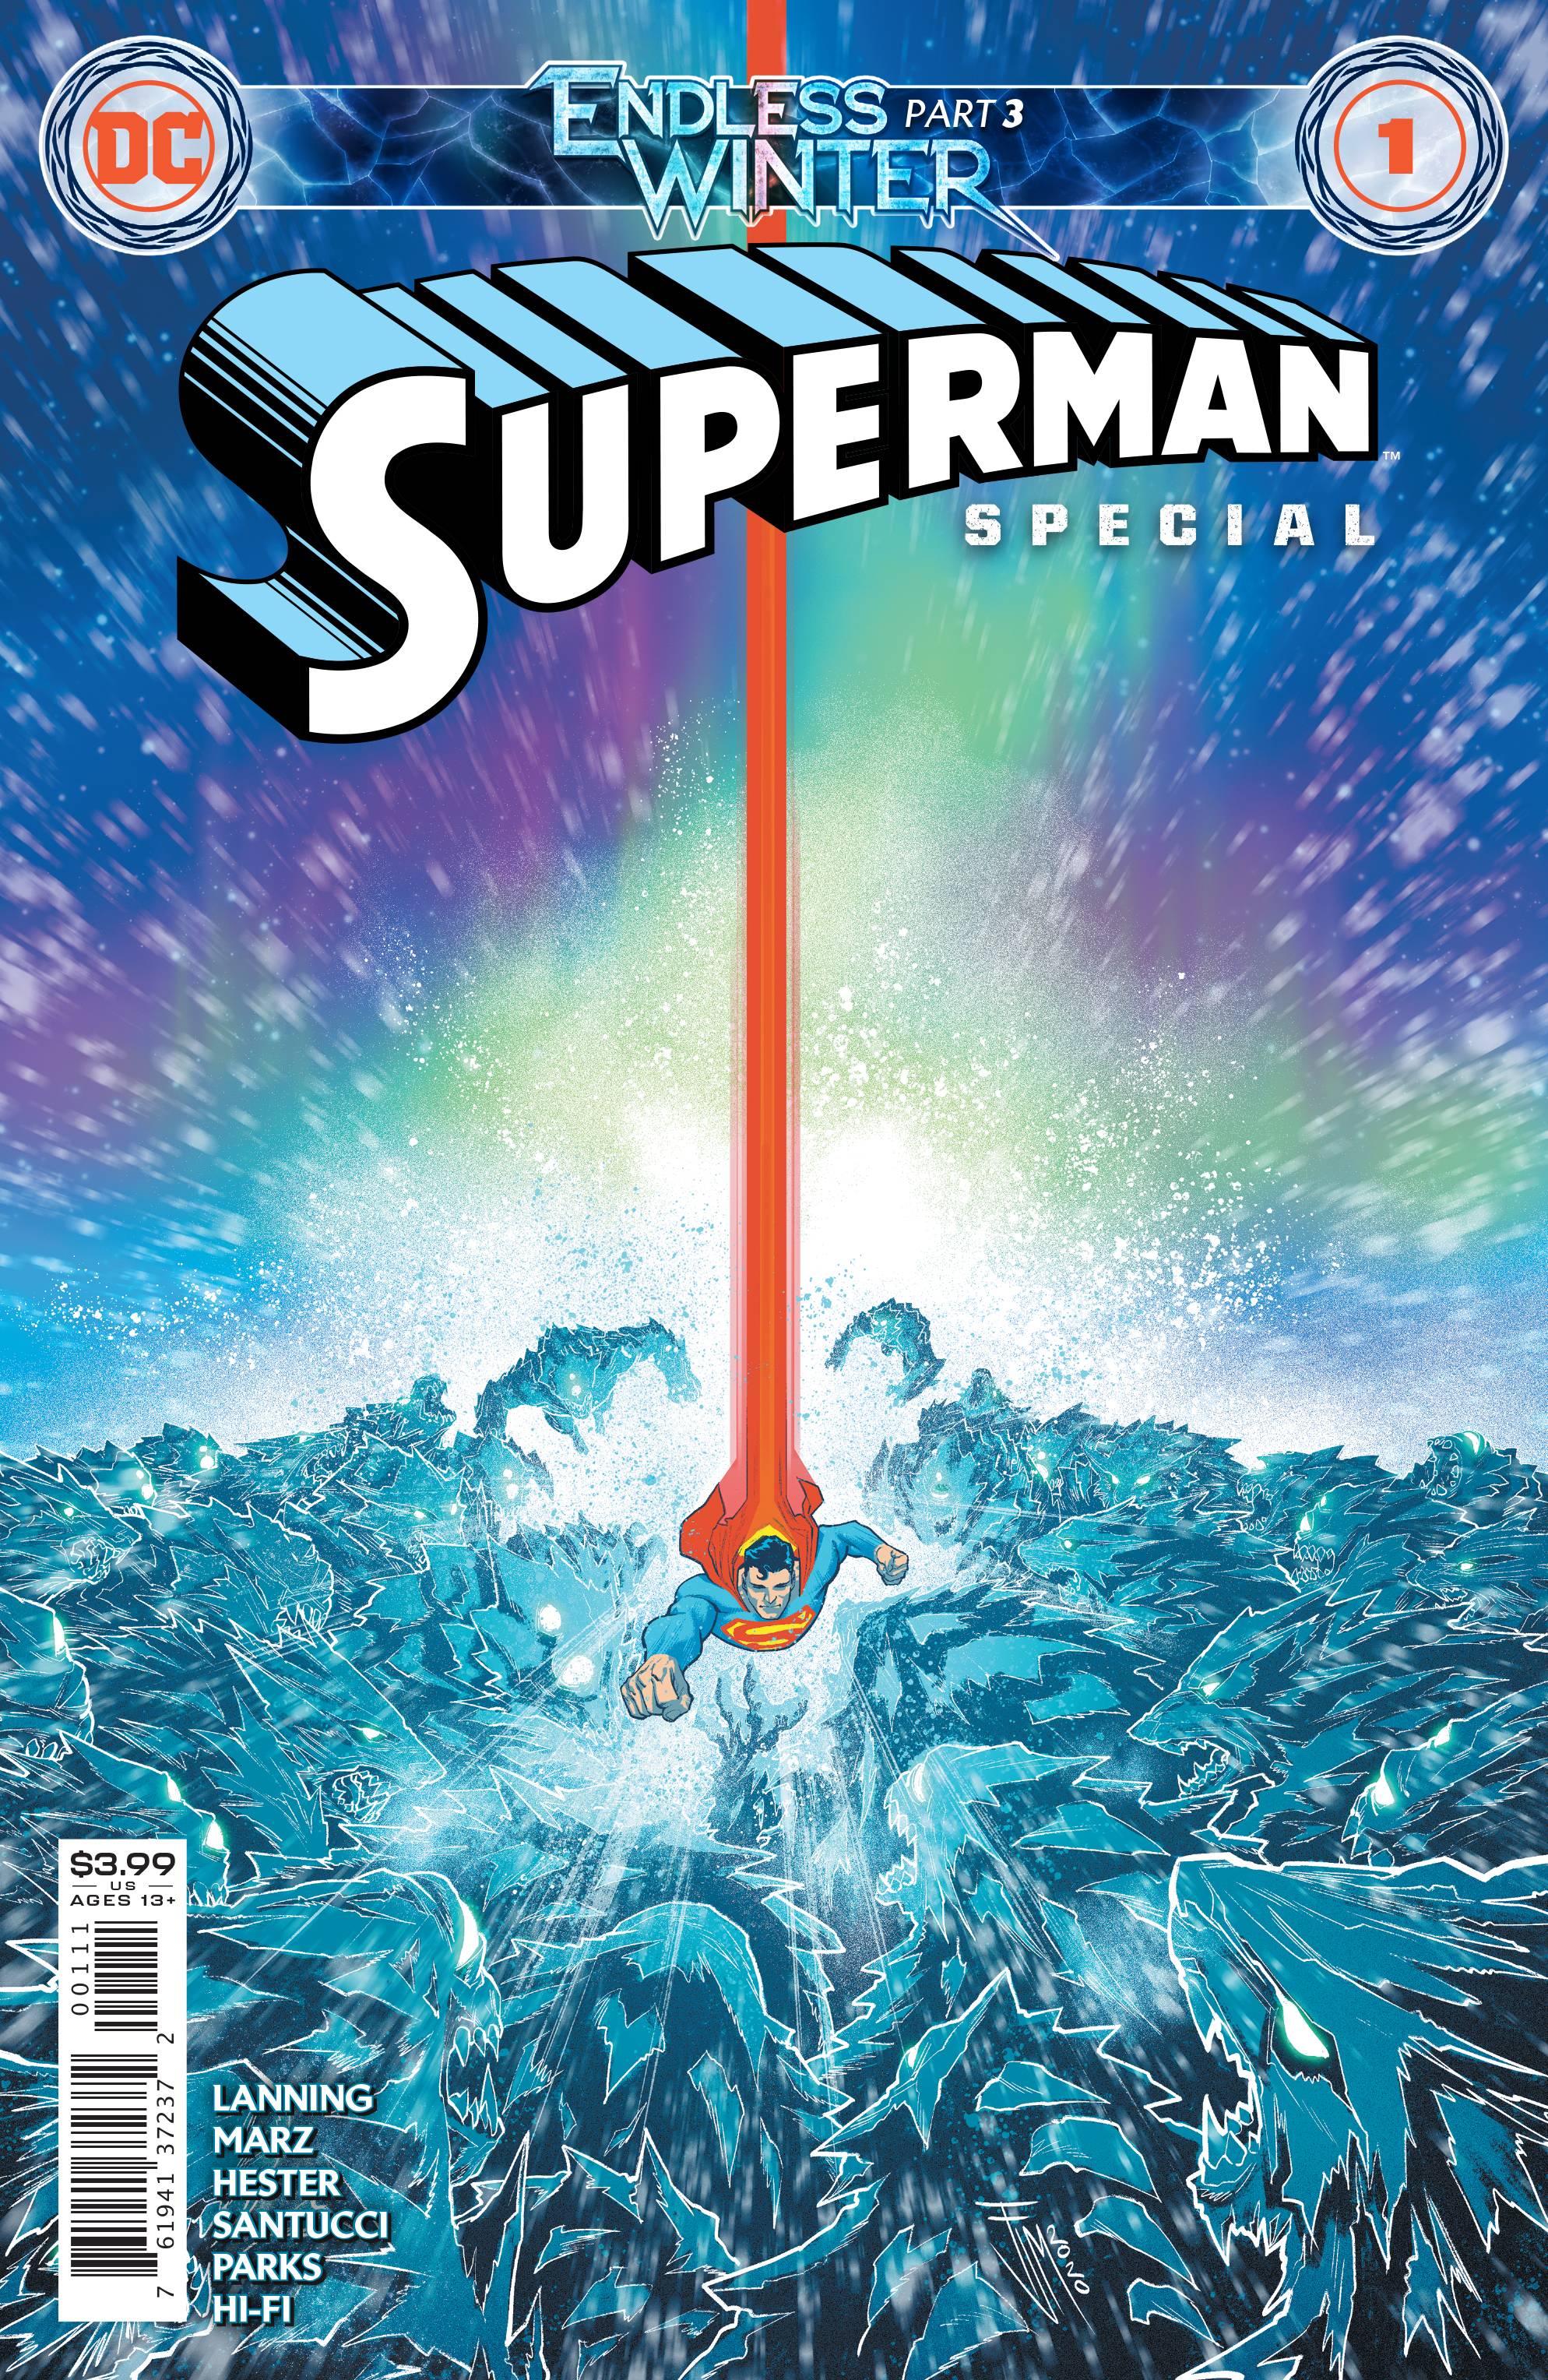 SUPERMAN ENDLESS WINTER SPECIAL #1 | Game Master's Emporium (The New GME)